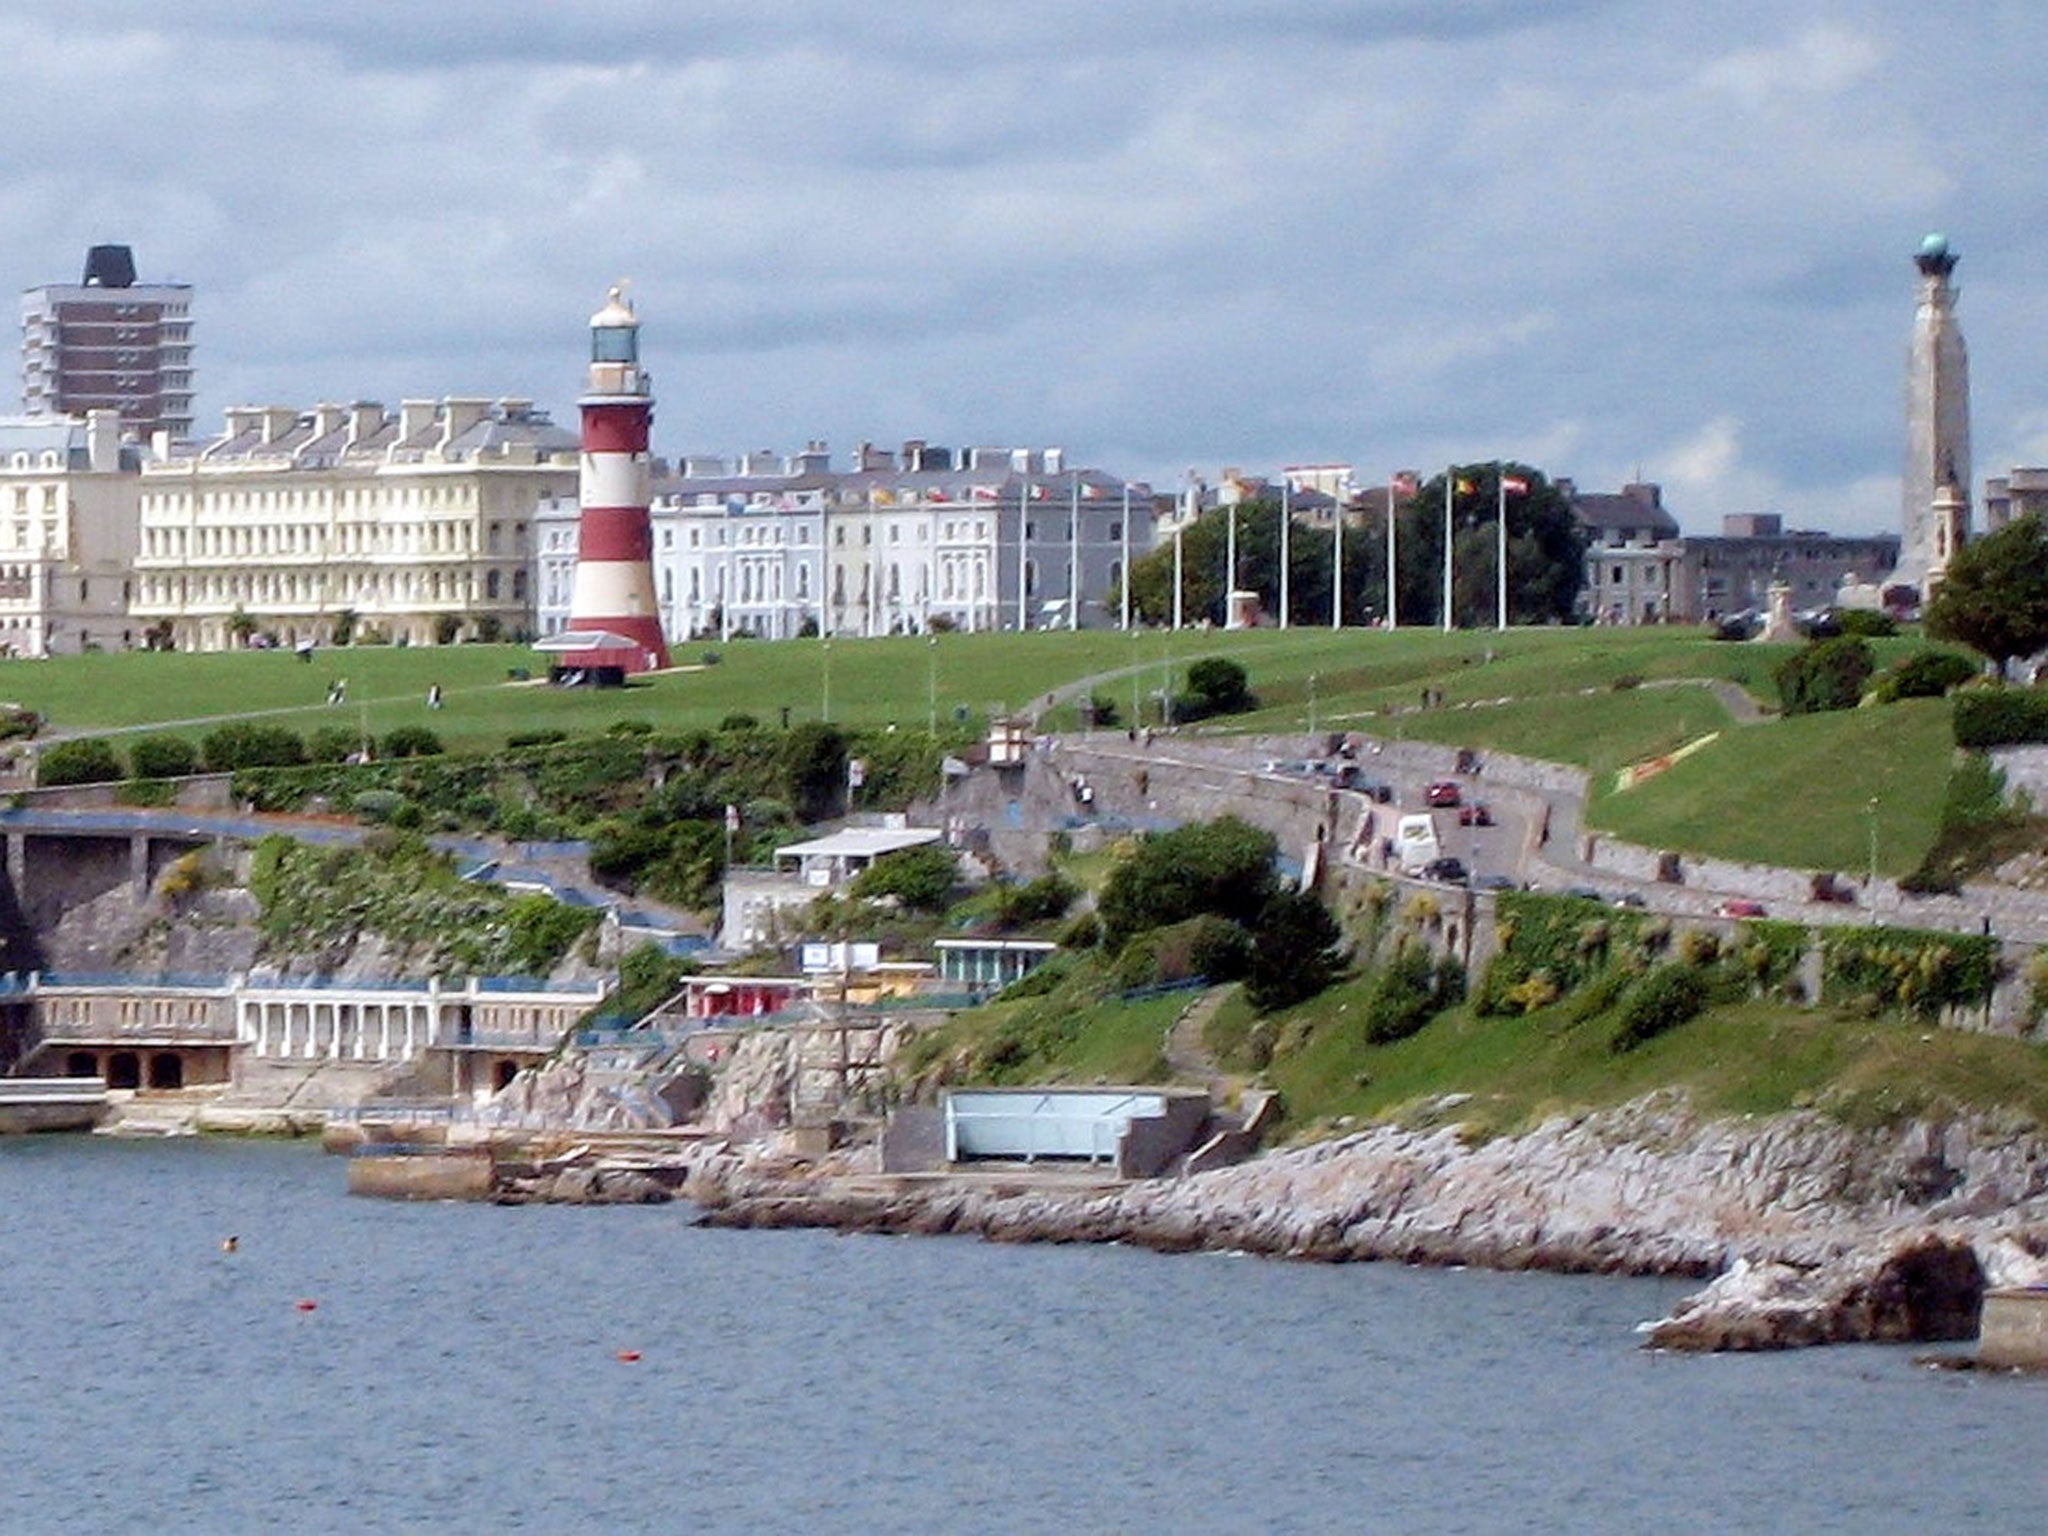 Plymouth was named the city with the most affordable rent in the UK